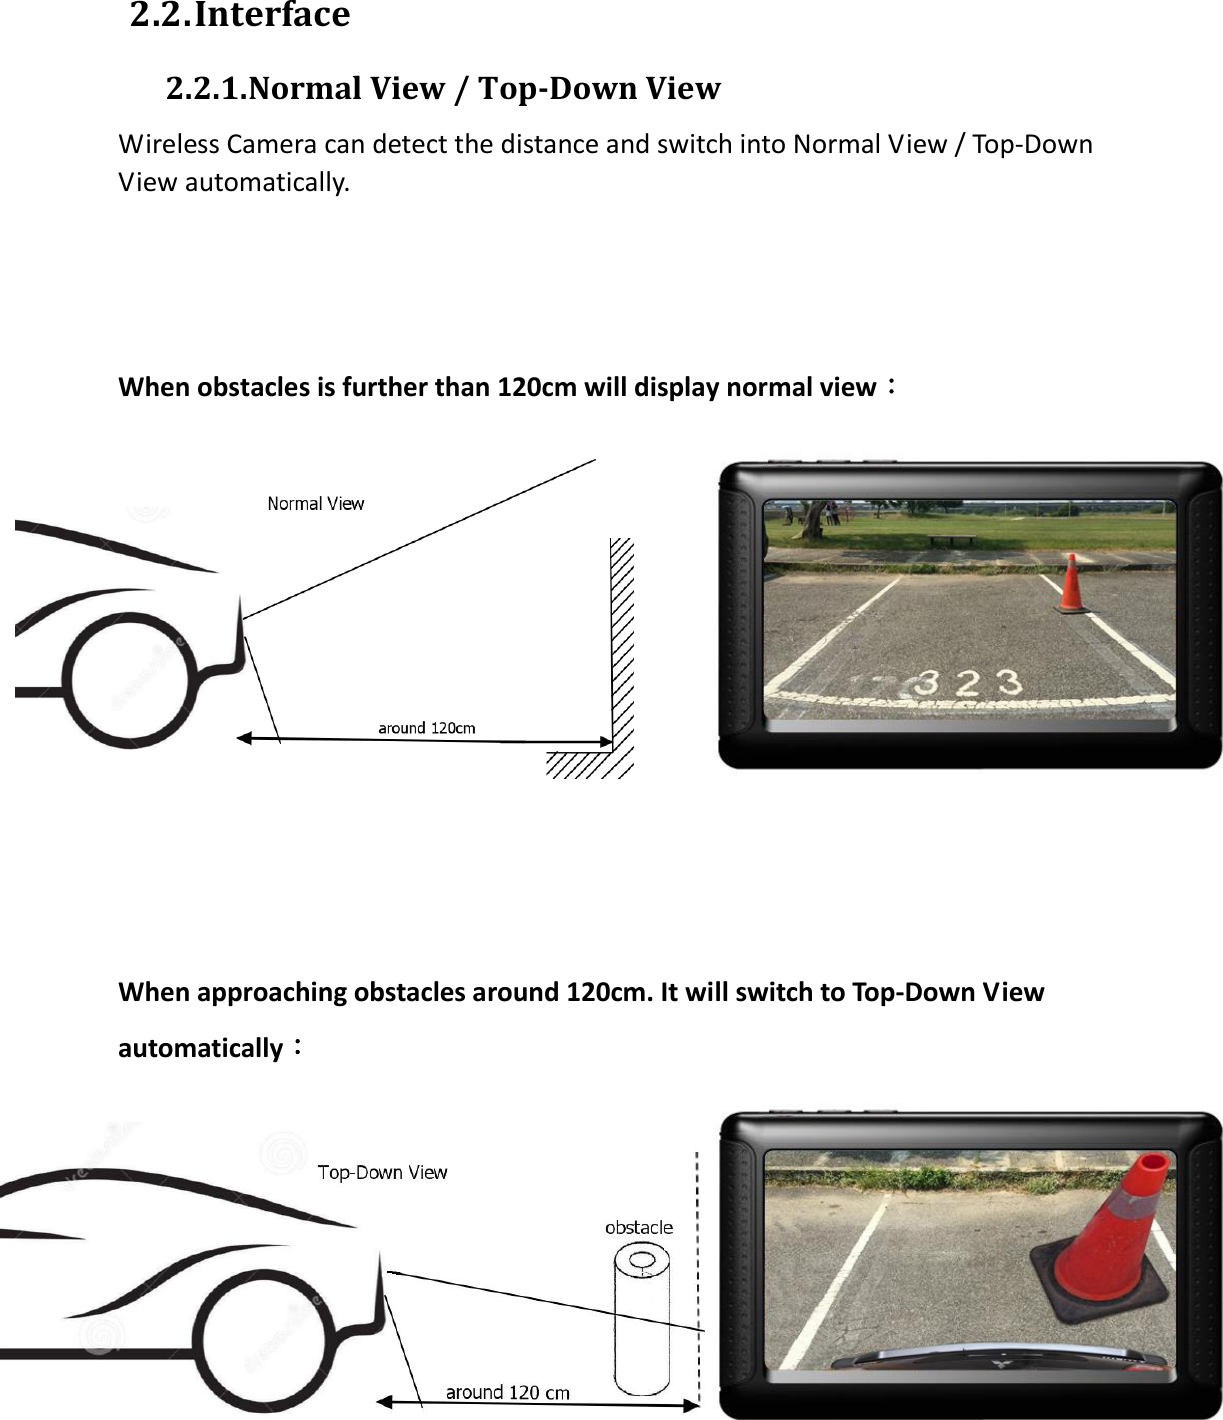  2.2. Interface 2.2.1. Normal View / Top-Down View   Wireless Camera can detect the distance and switch into Normal View / Top-Down View automatically.       When obstacles is further than 120cm will display normal view：      When approaching obstacles around 120cm. It will switch to Top-Down View automatically：   